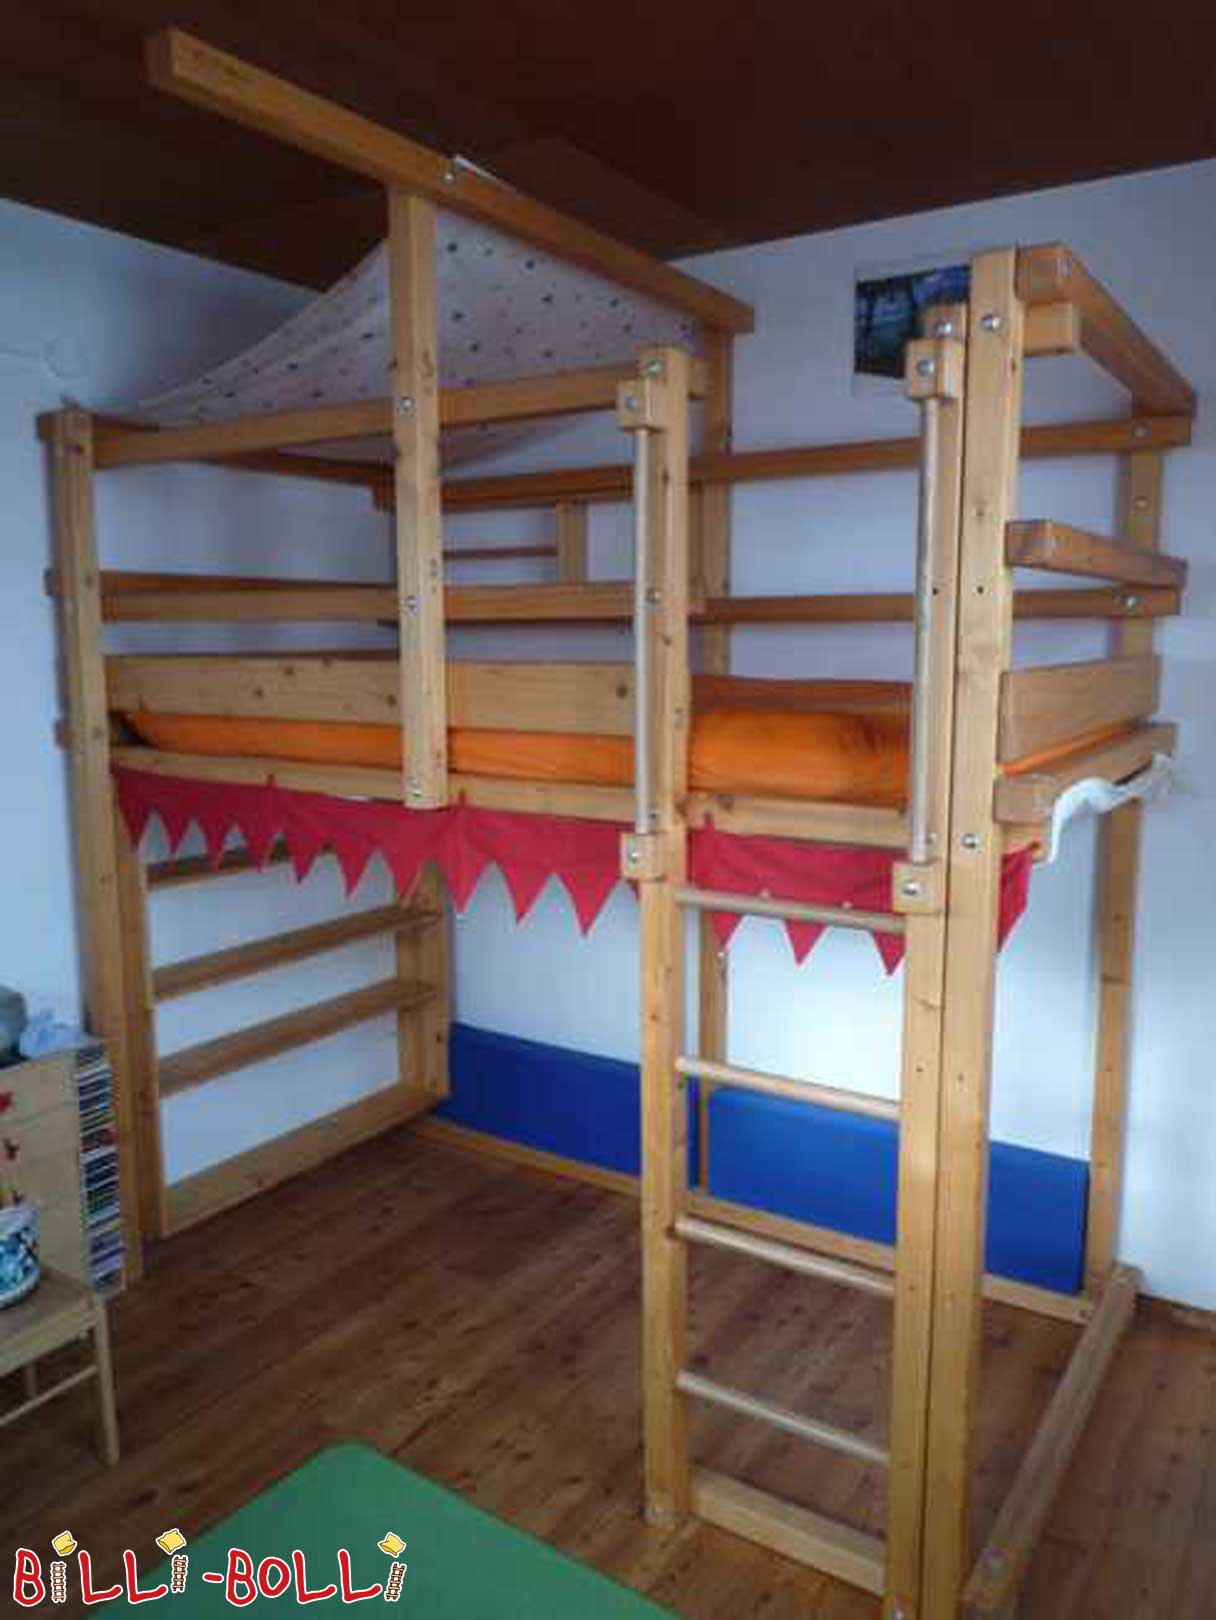 Billi-Bolli bunk bed, laterally offset (Category: second hand loft bed)